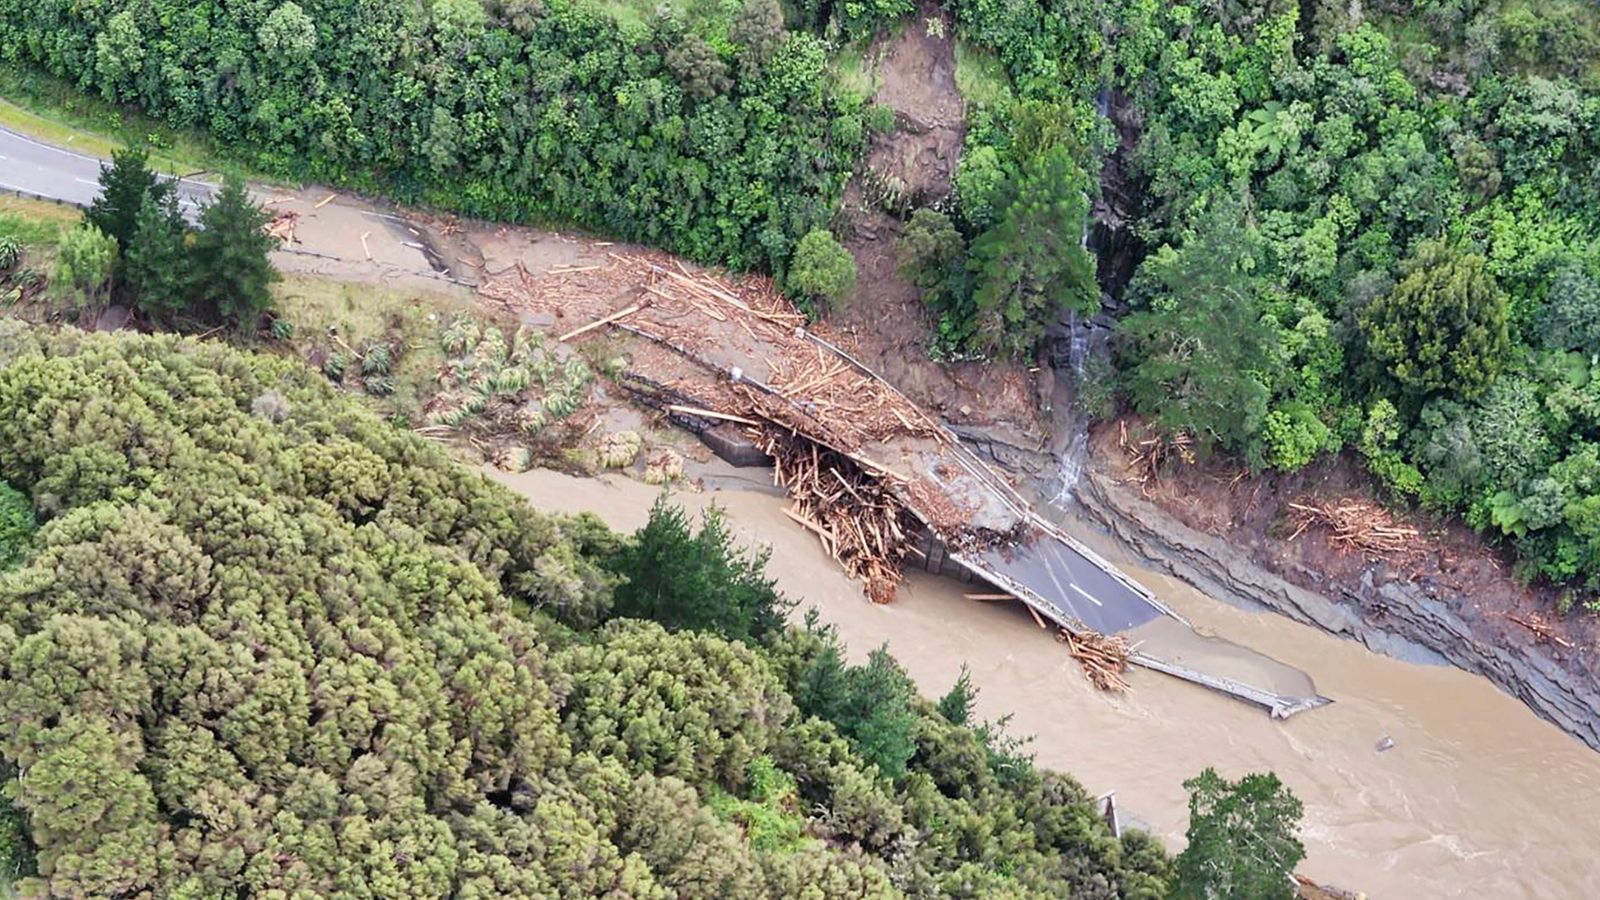 New Zealand: Child among four dead after Cyclone Gabrielle causes flooding and landslides